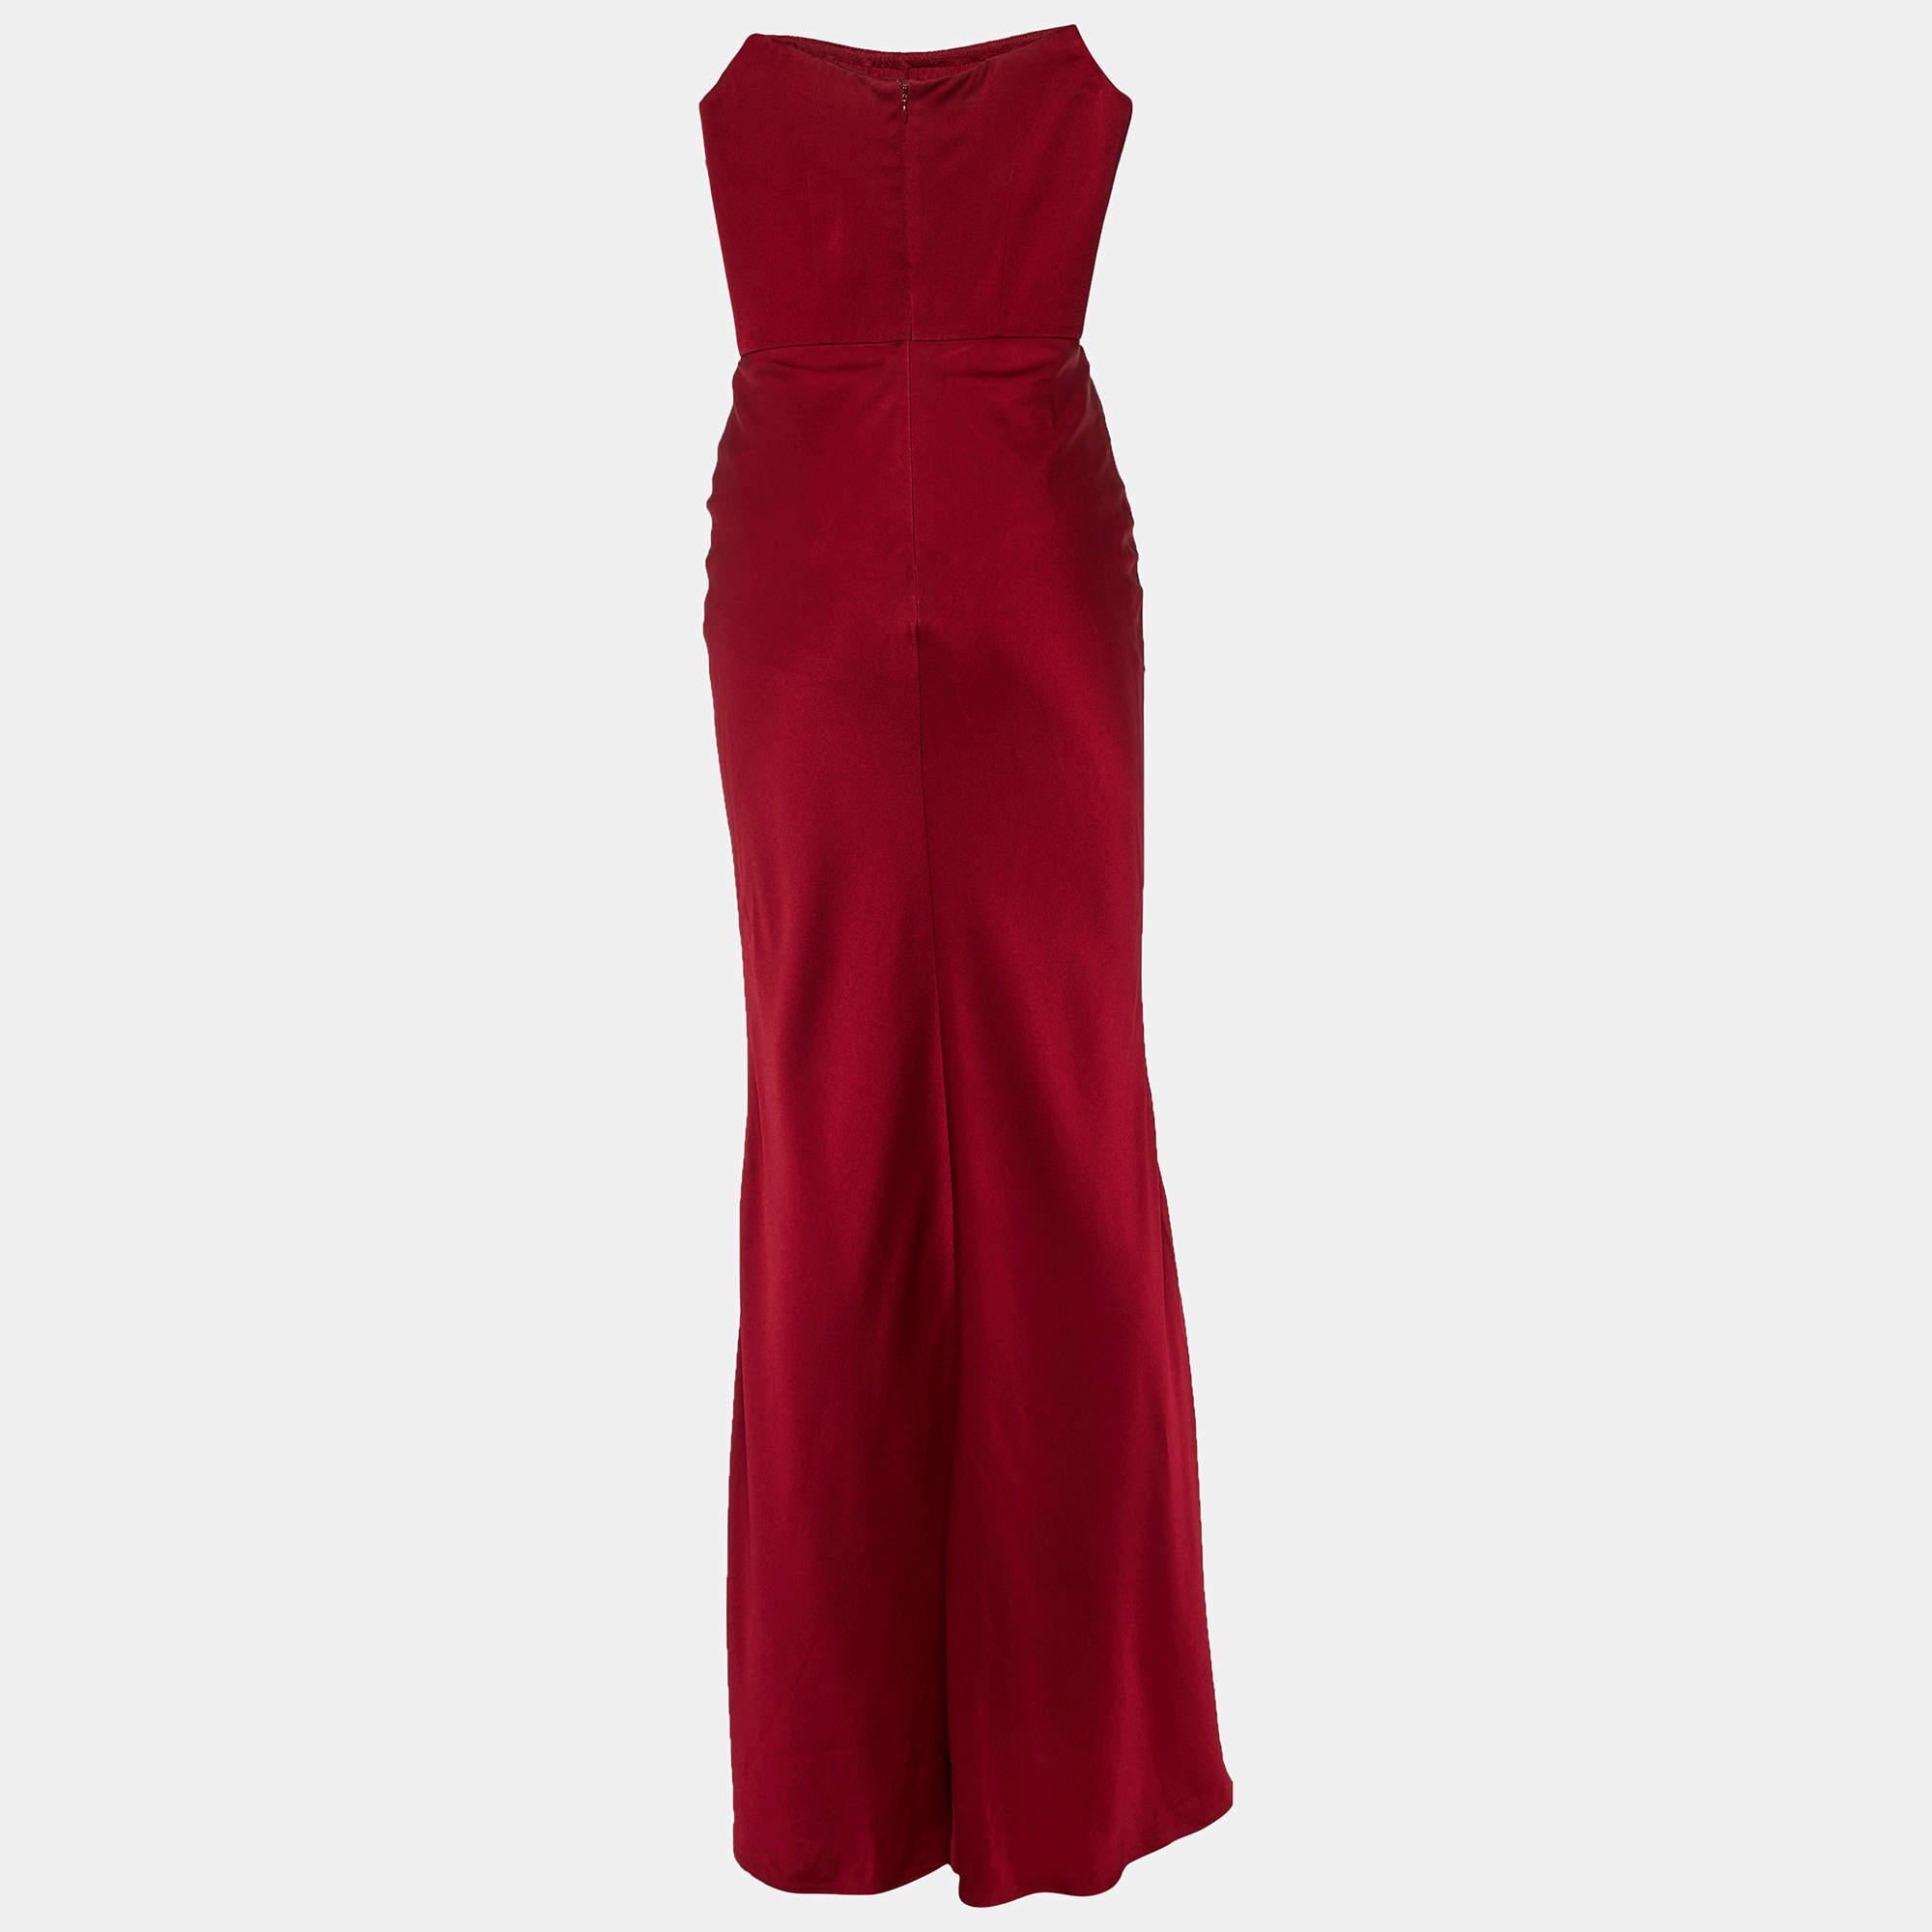 For all evening soirées and high-affair parties, a gown like this makes sure you look the best of all. Tailored into a superb fit and style, this Alexander McQueen gown is elevated with a stunning neckline and a beautiful hue. Bring home this lovely